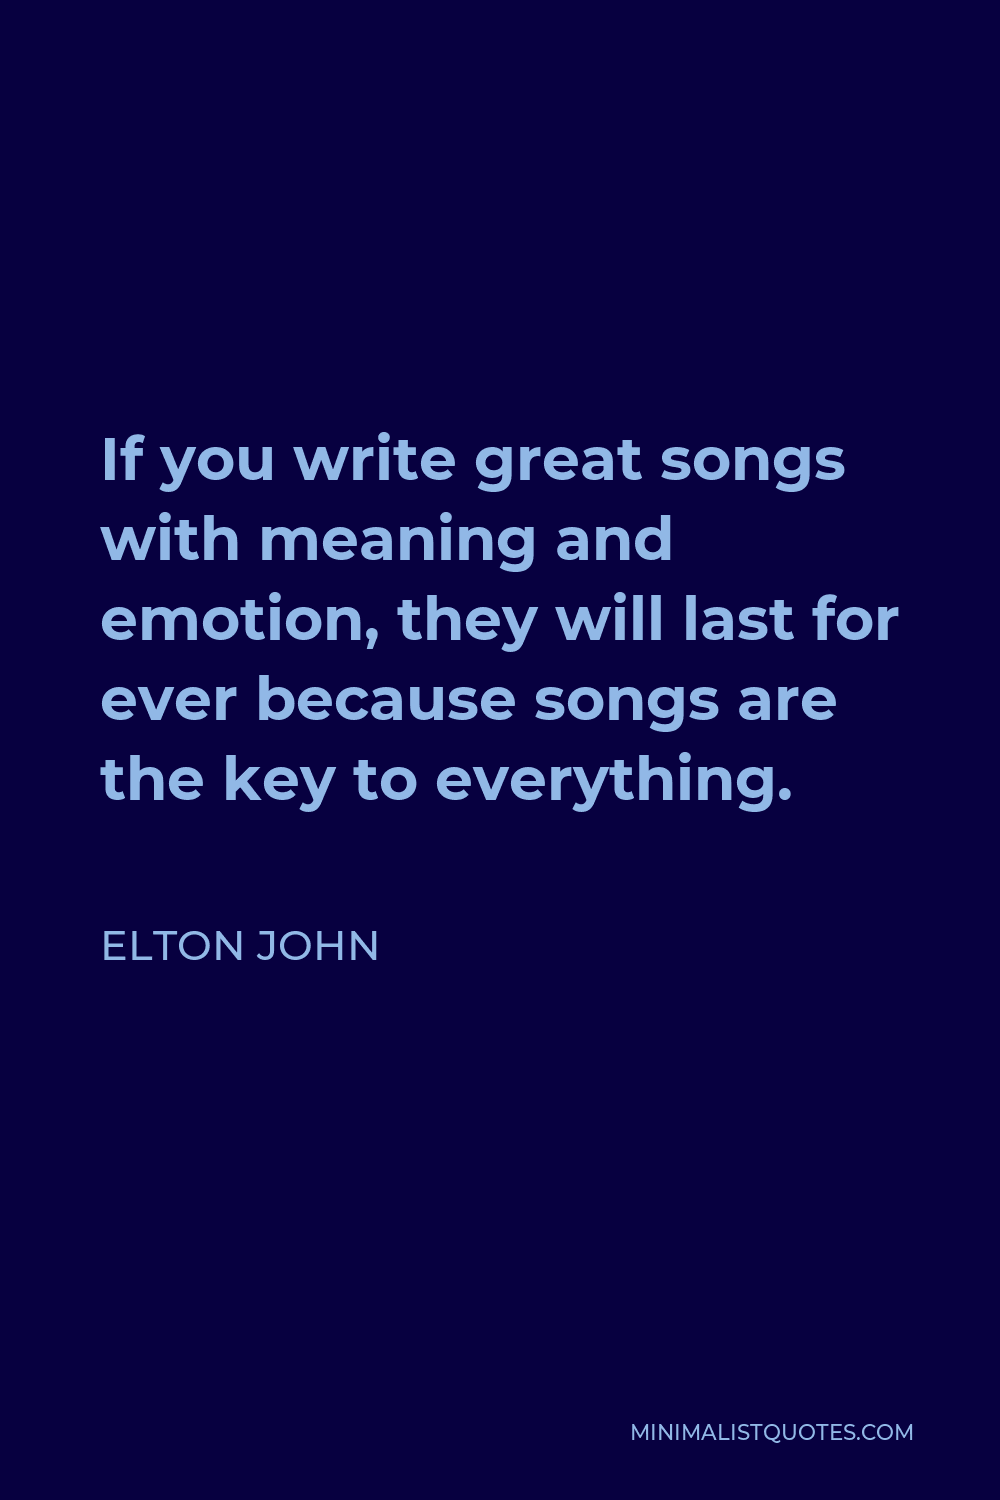 Elton John Quote If You Write Great Songs With Meaning And Emotion They Will Last For Ever